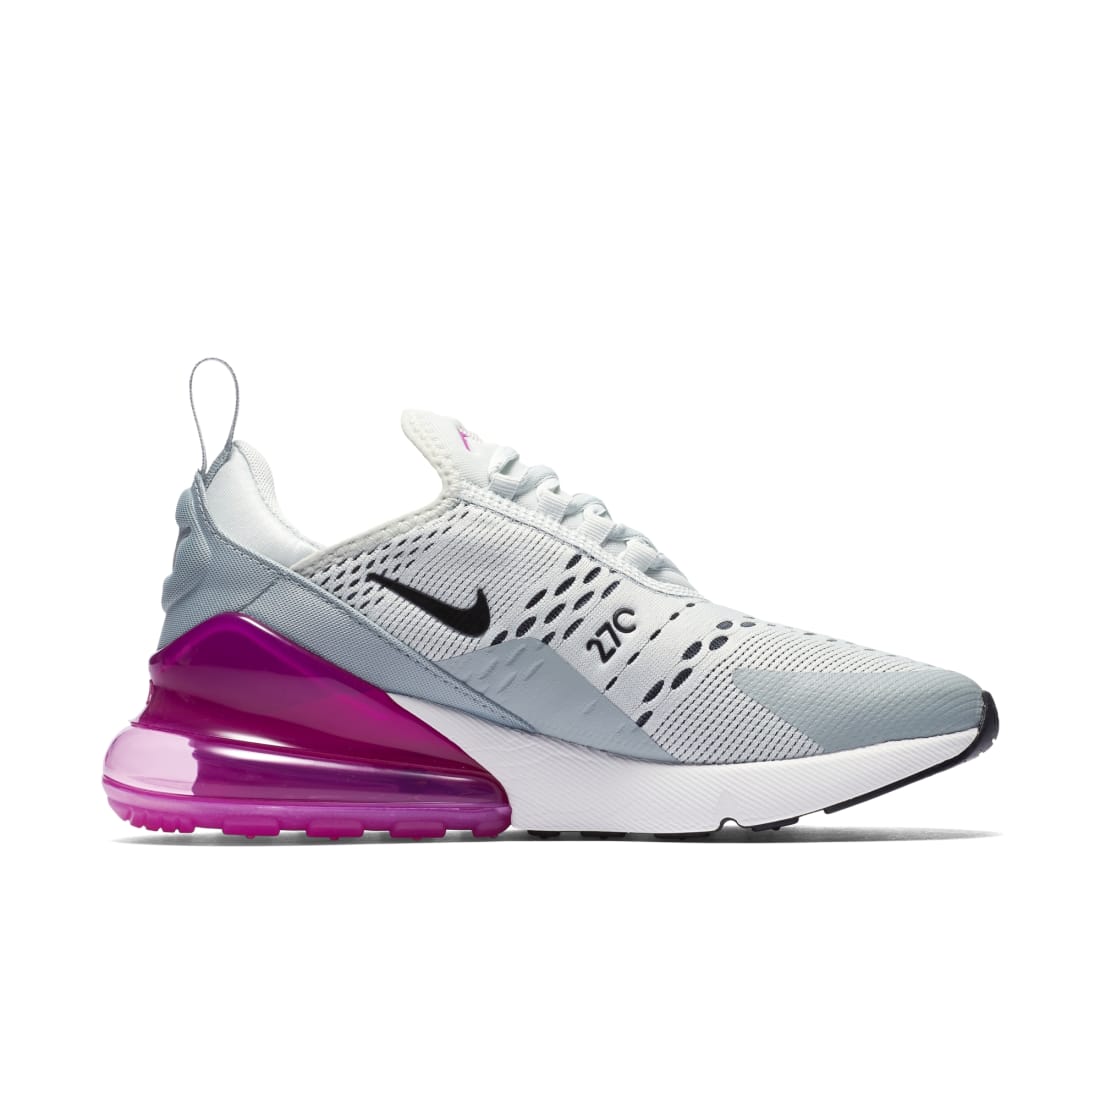 Air Max 270 Barely Grey Fuchsia | Nike | Release Sneaker Calendar, Prices & Collaborations